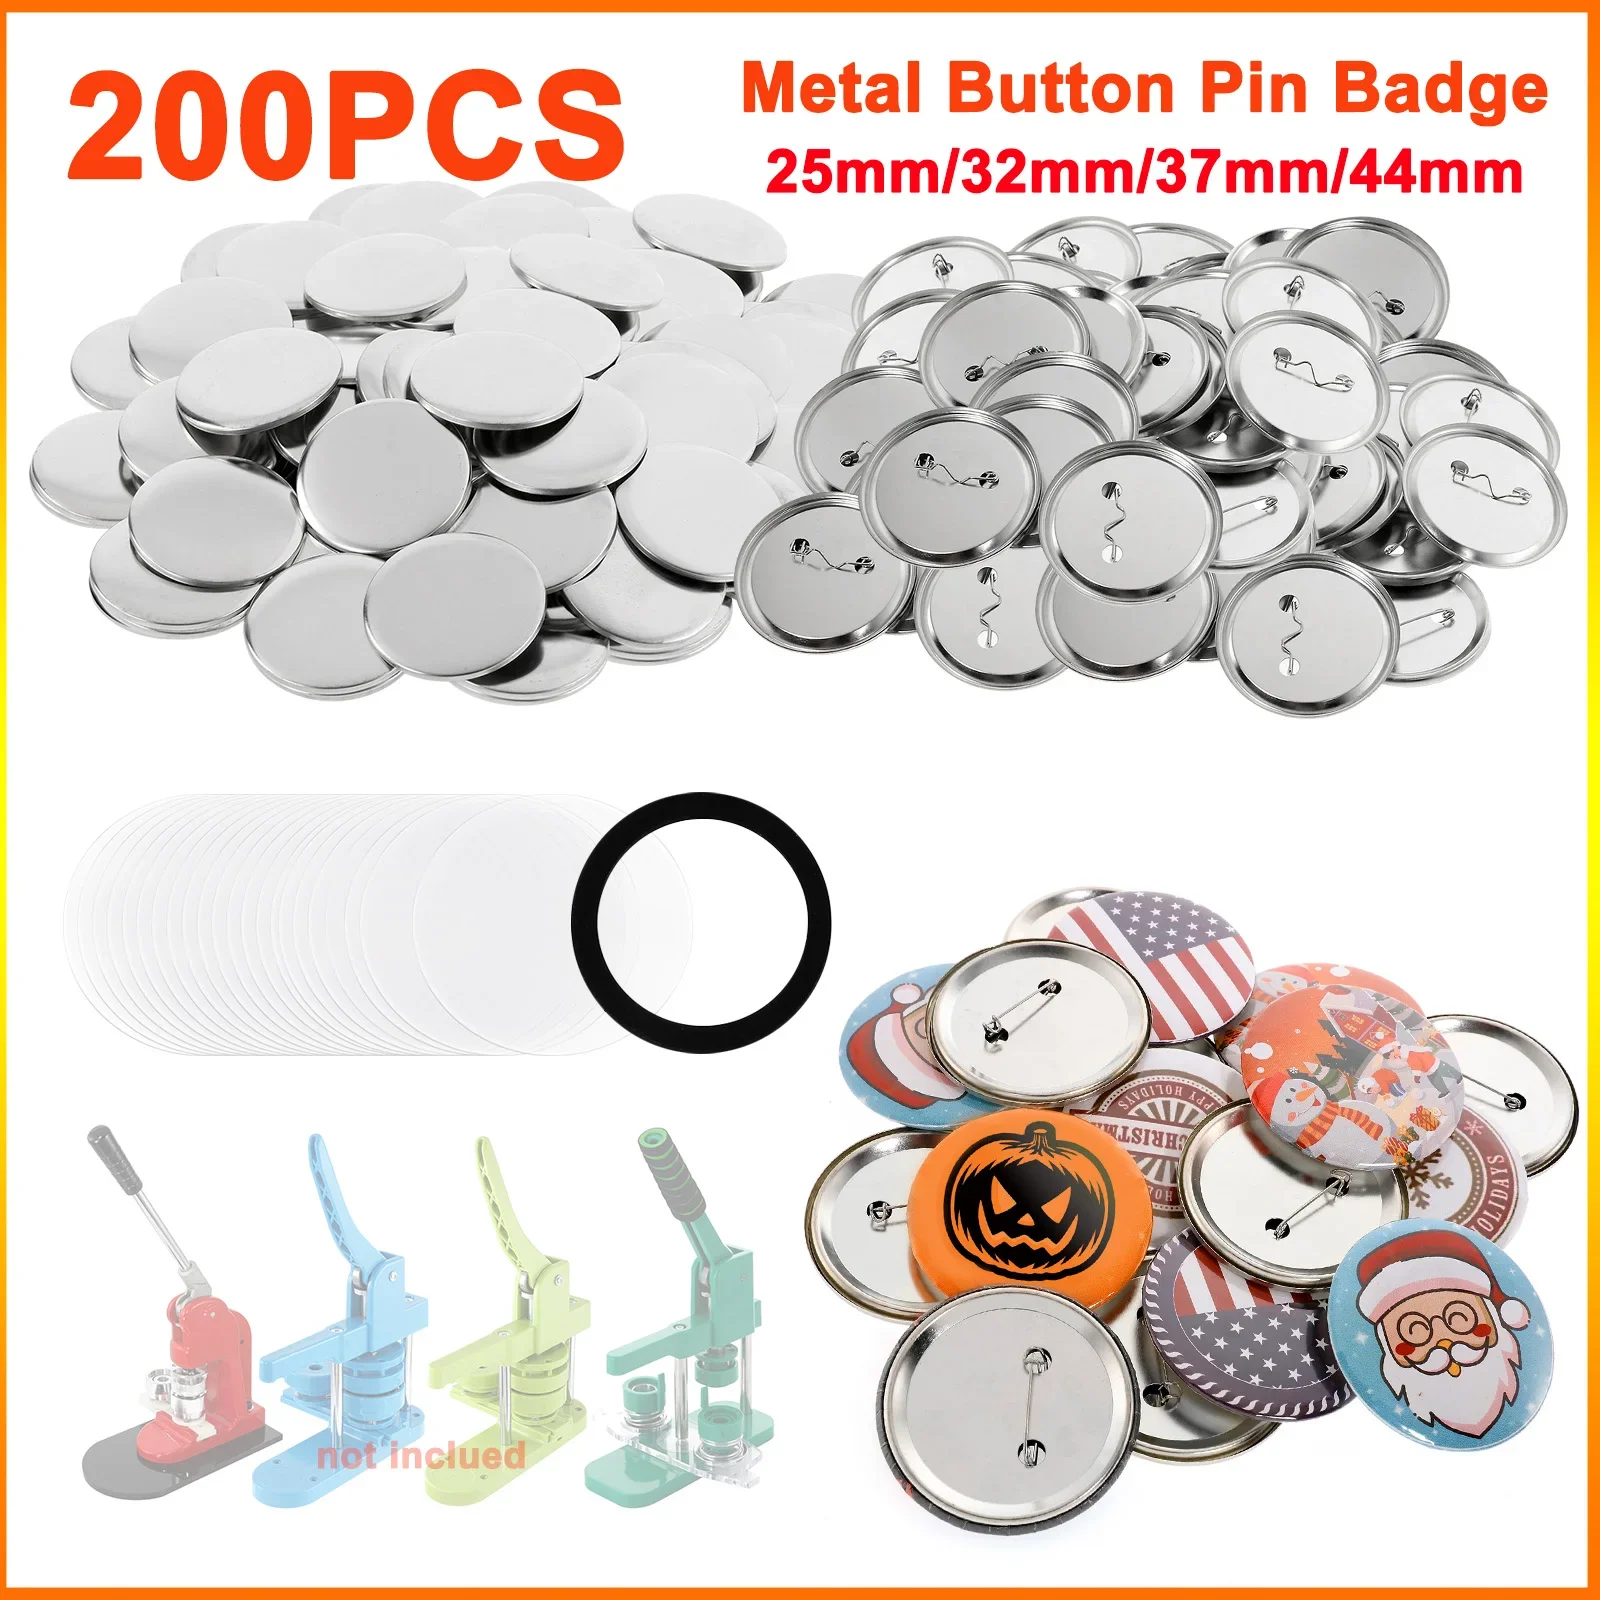 200Sets Metal Badge Pin Button Maker Parts 25mm 32mm 37mm DIY Blank Badge Button Parts for Art Crafts Making Iron-Base Badges